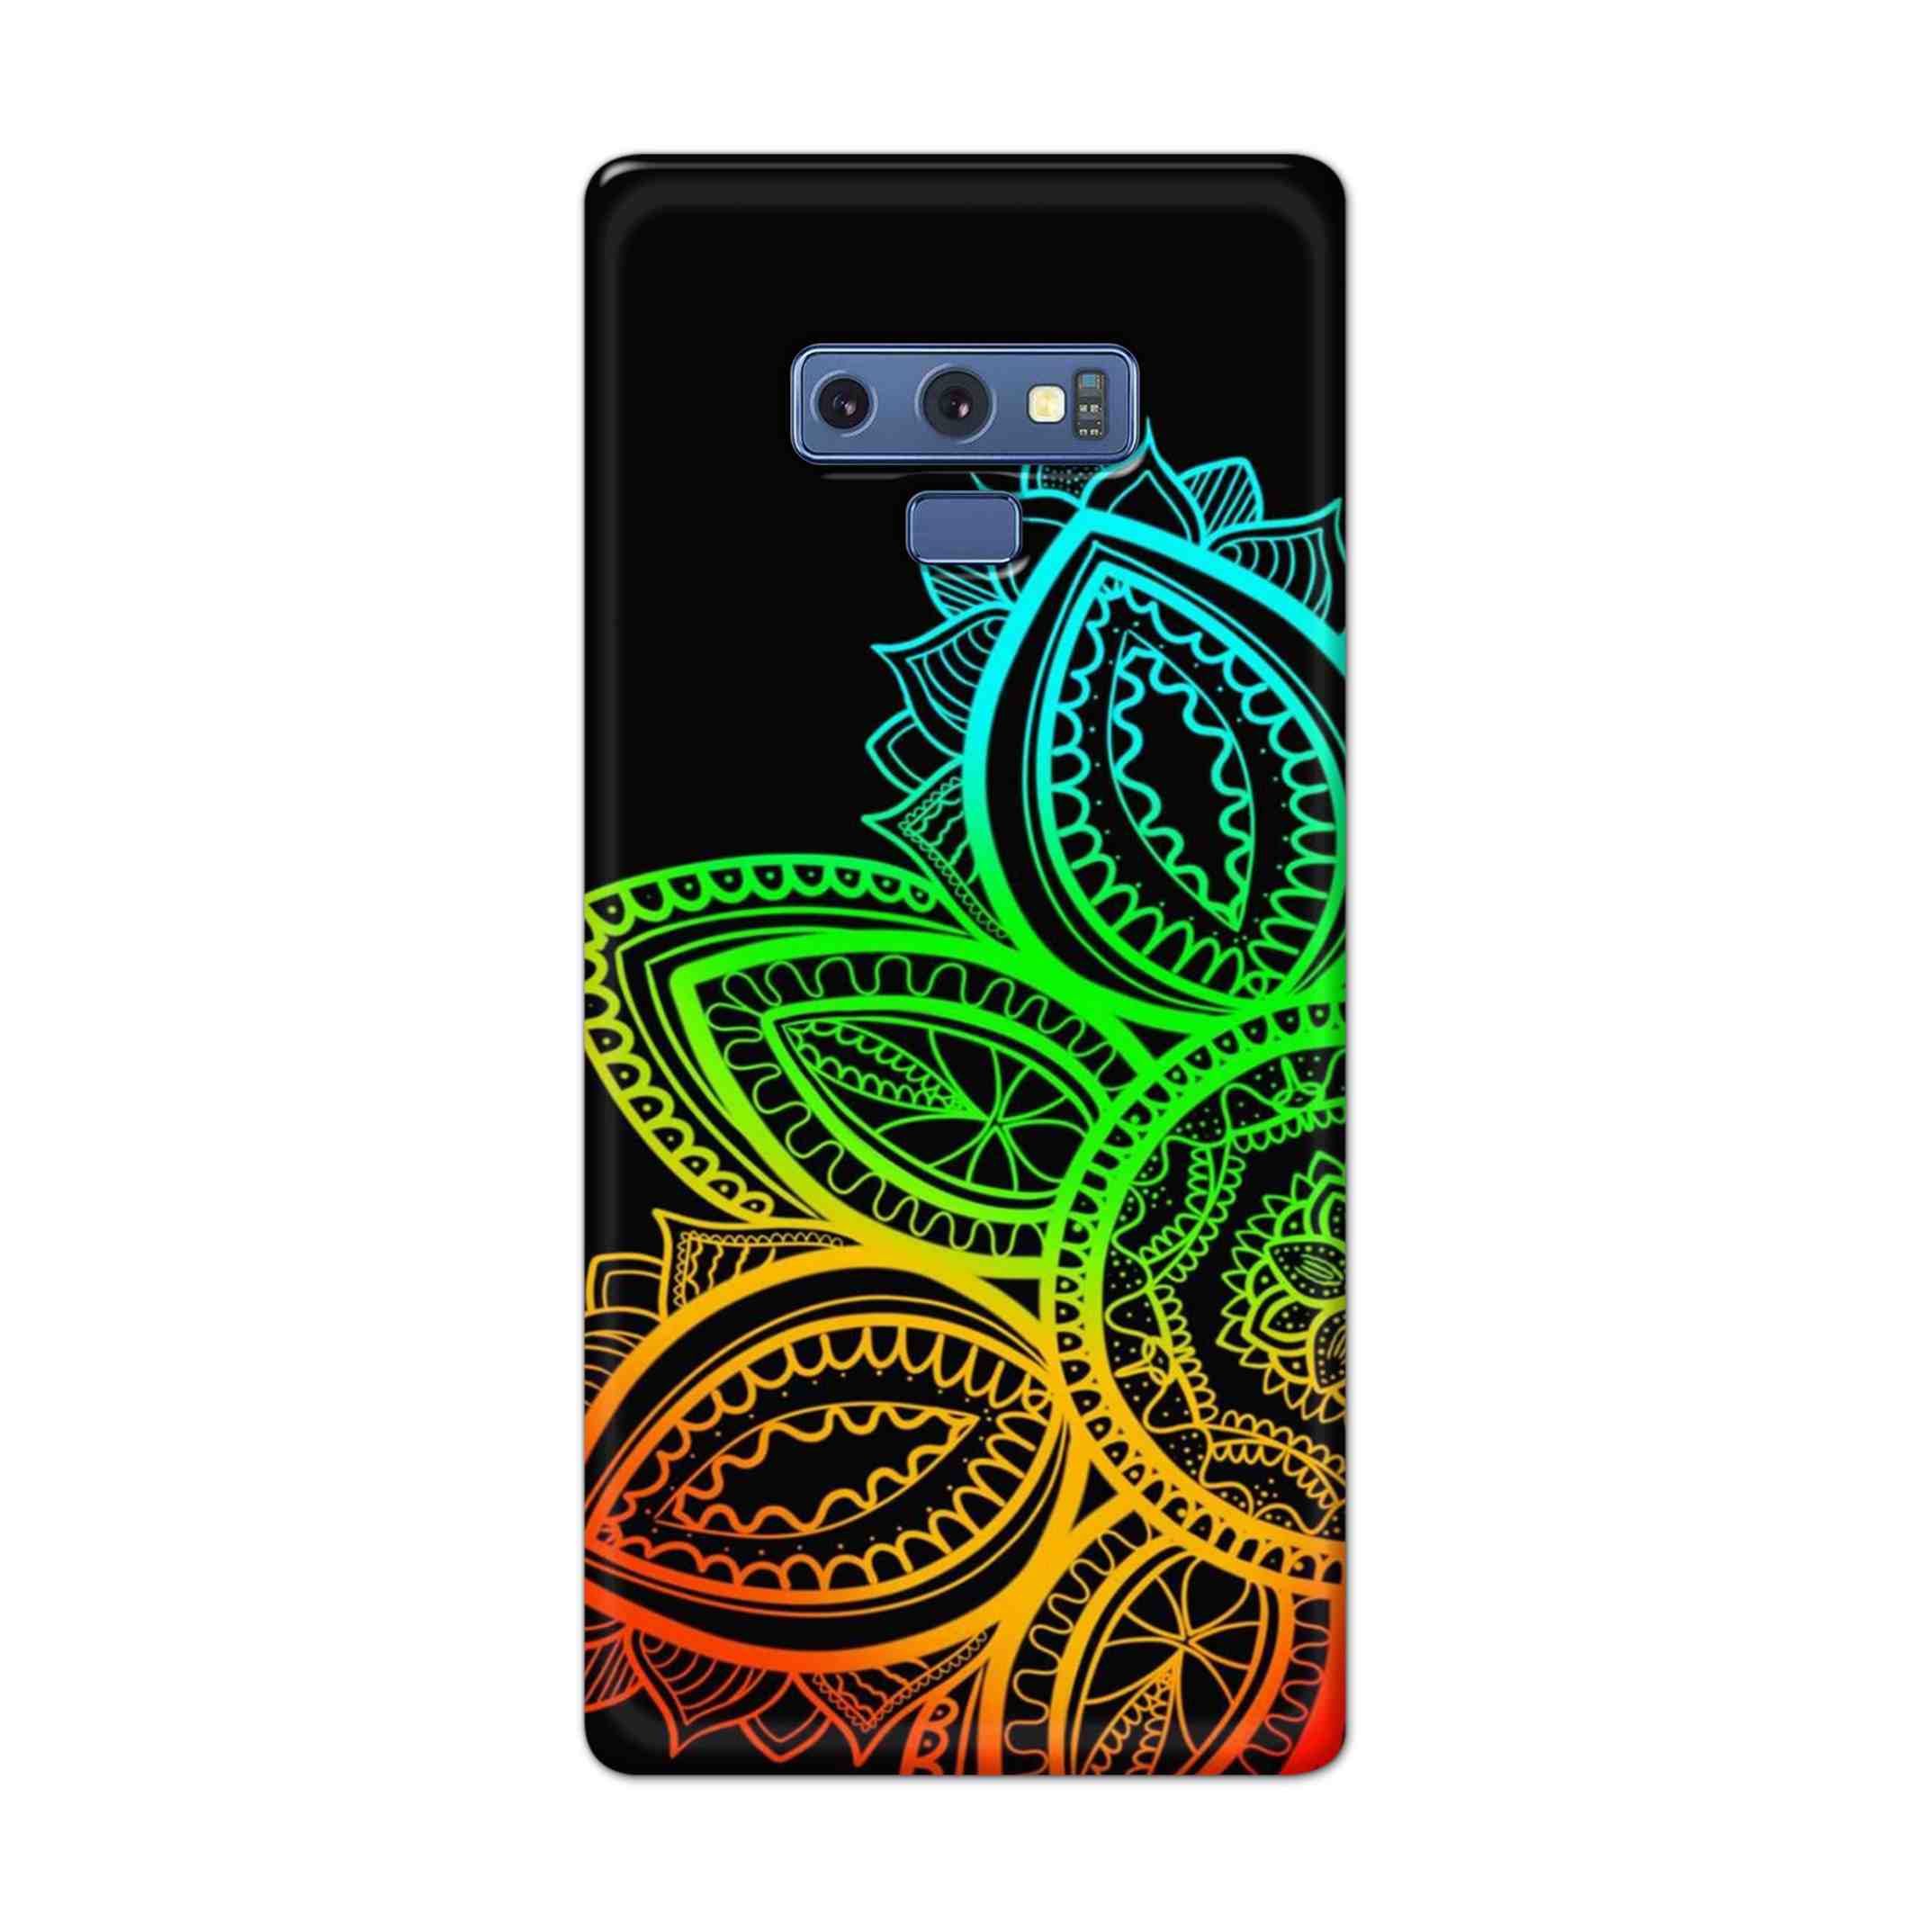 Buy Neon Mandala Hard Back Mobile Phone Case Cover For Samsung Galaxy Note 9 Online